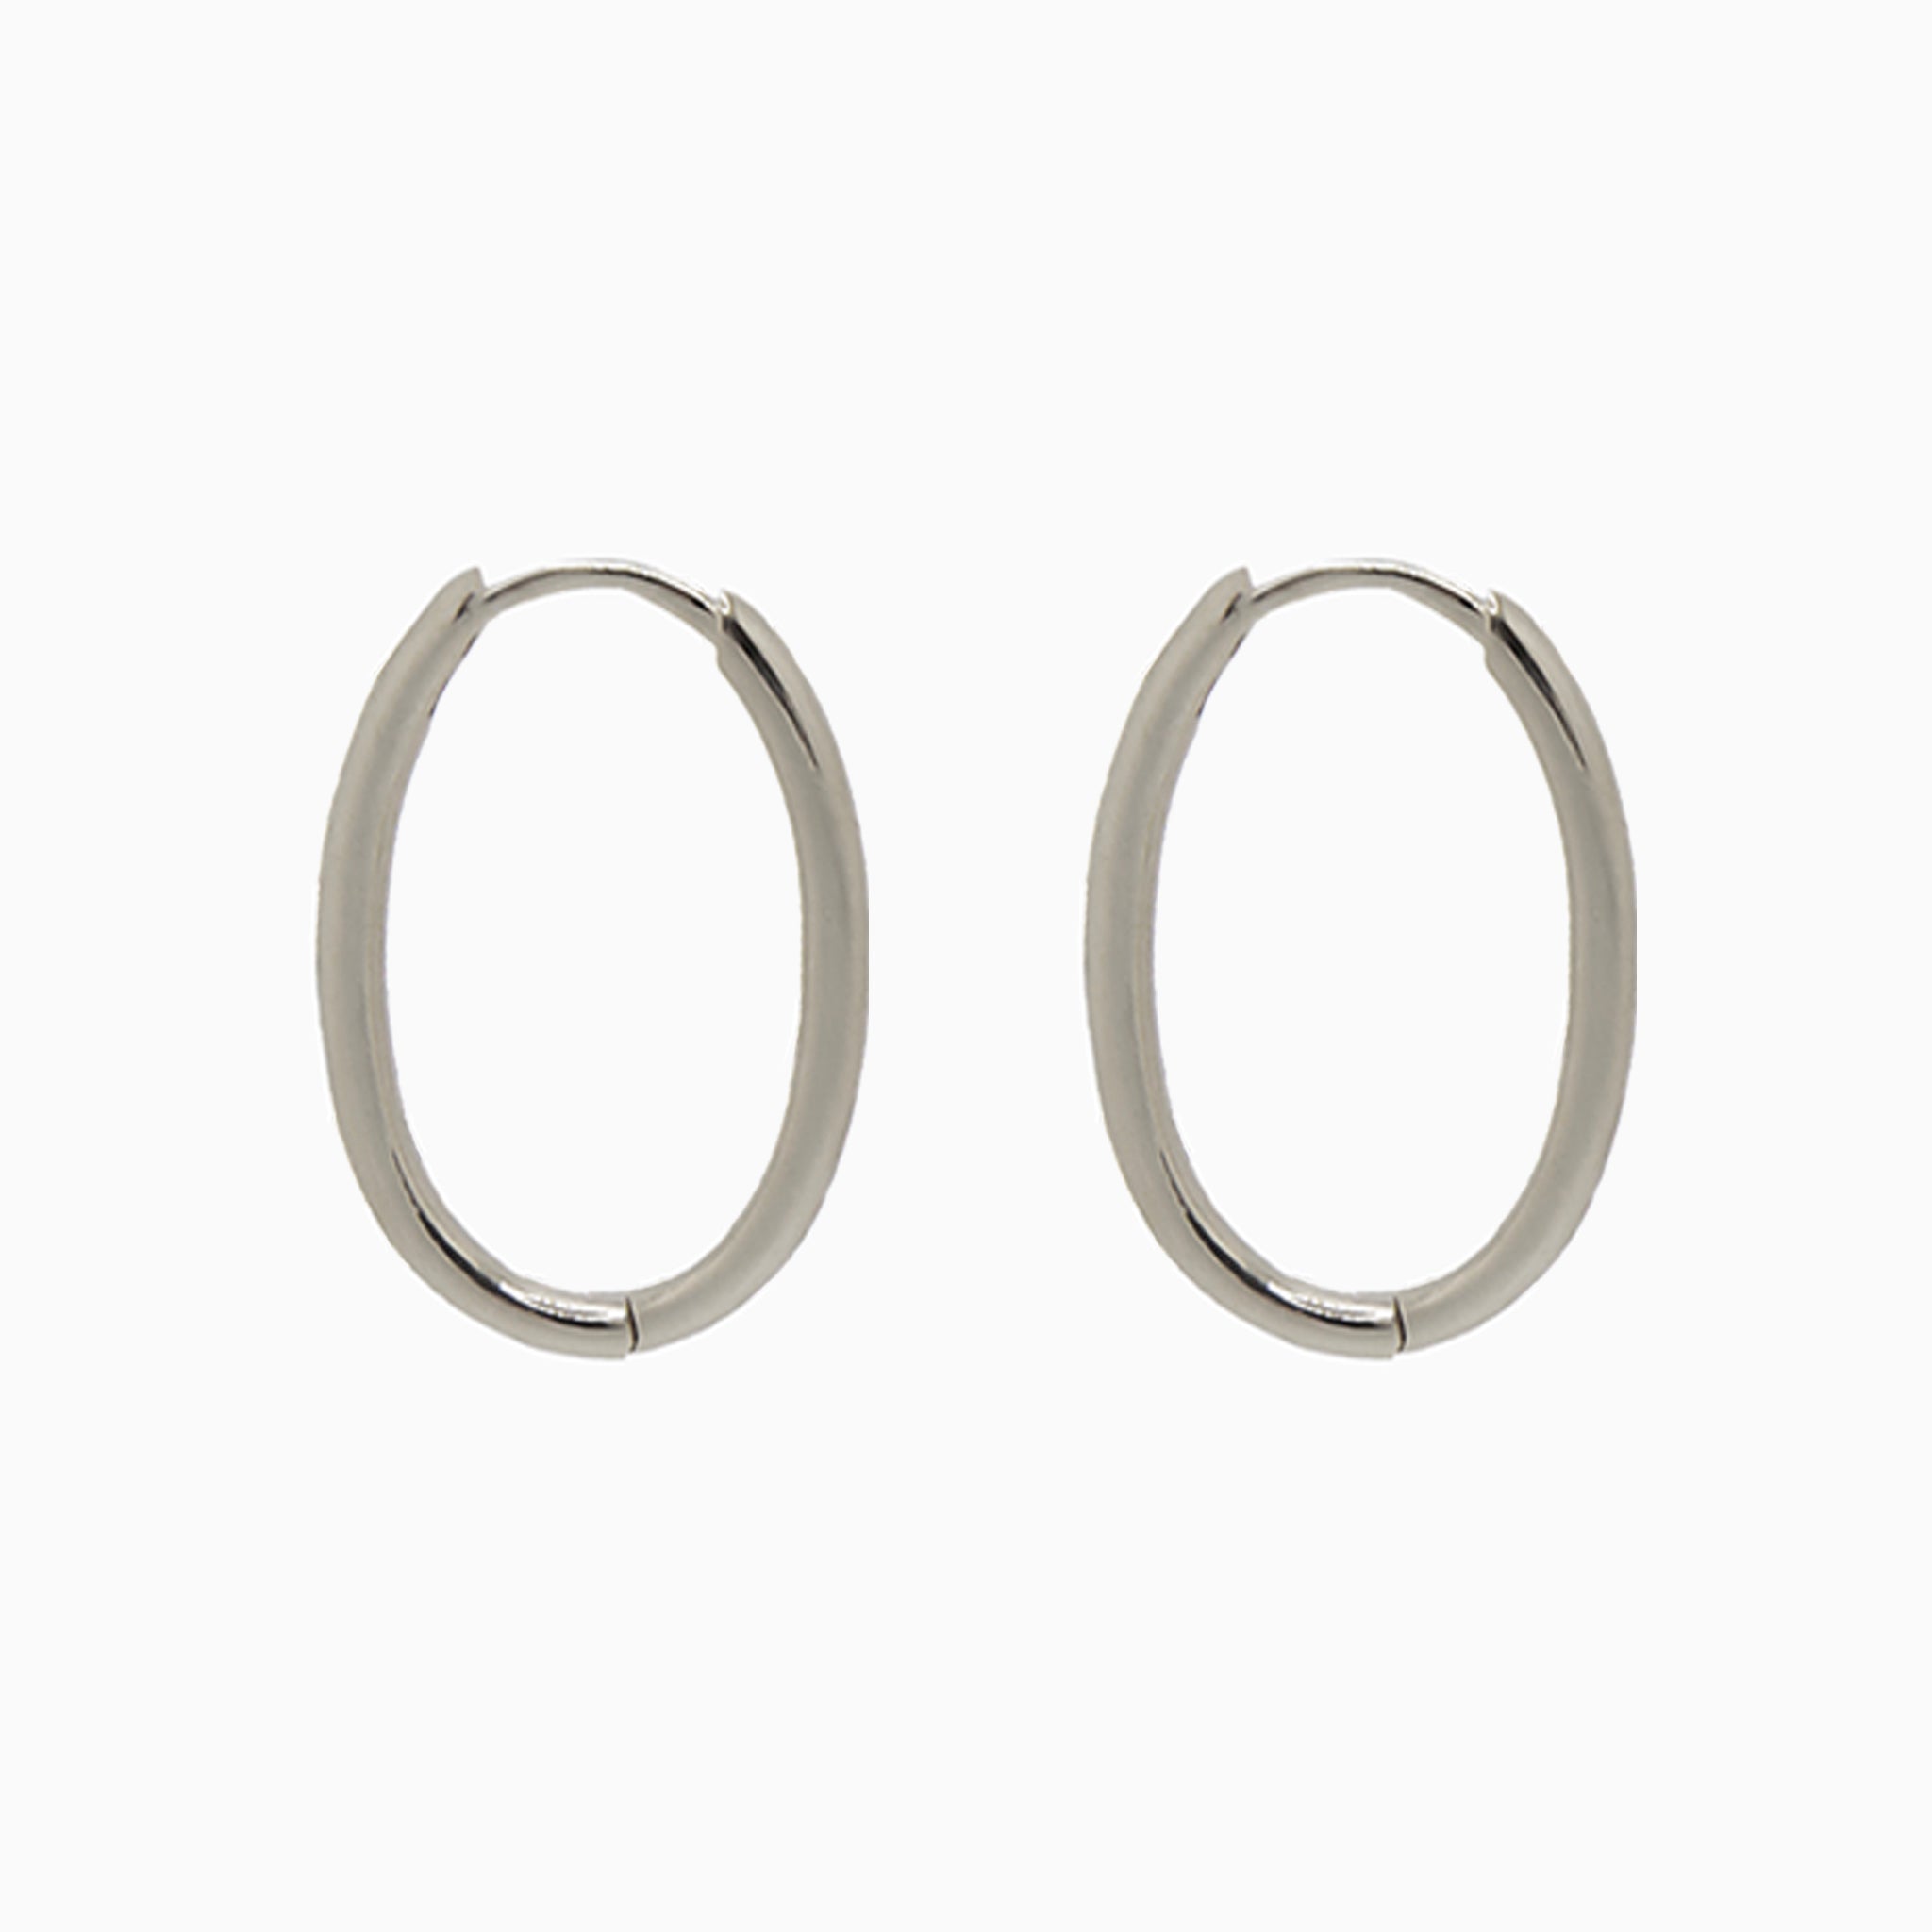 14k White Gold 19mm x 13mm Hinged Everyday Oval Hoop Earrings, Side View